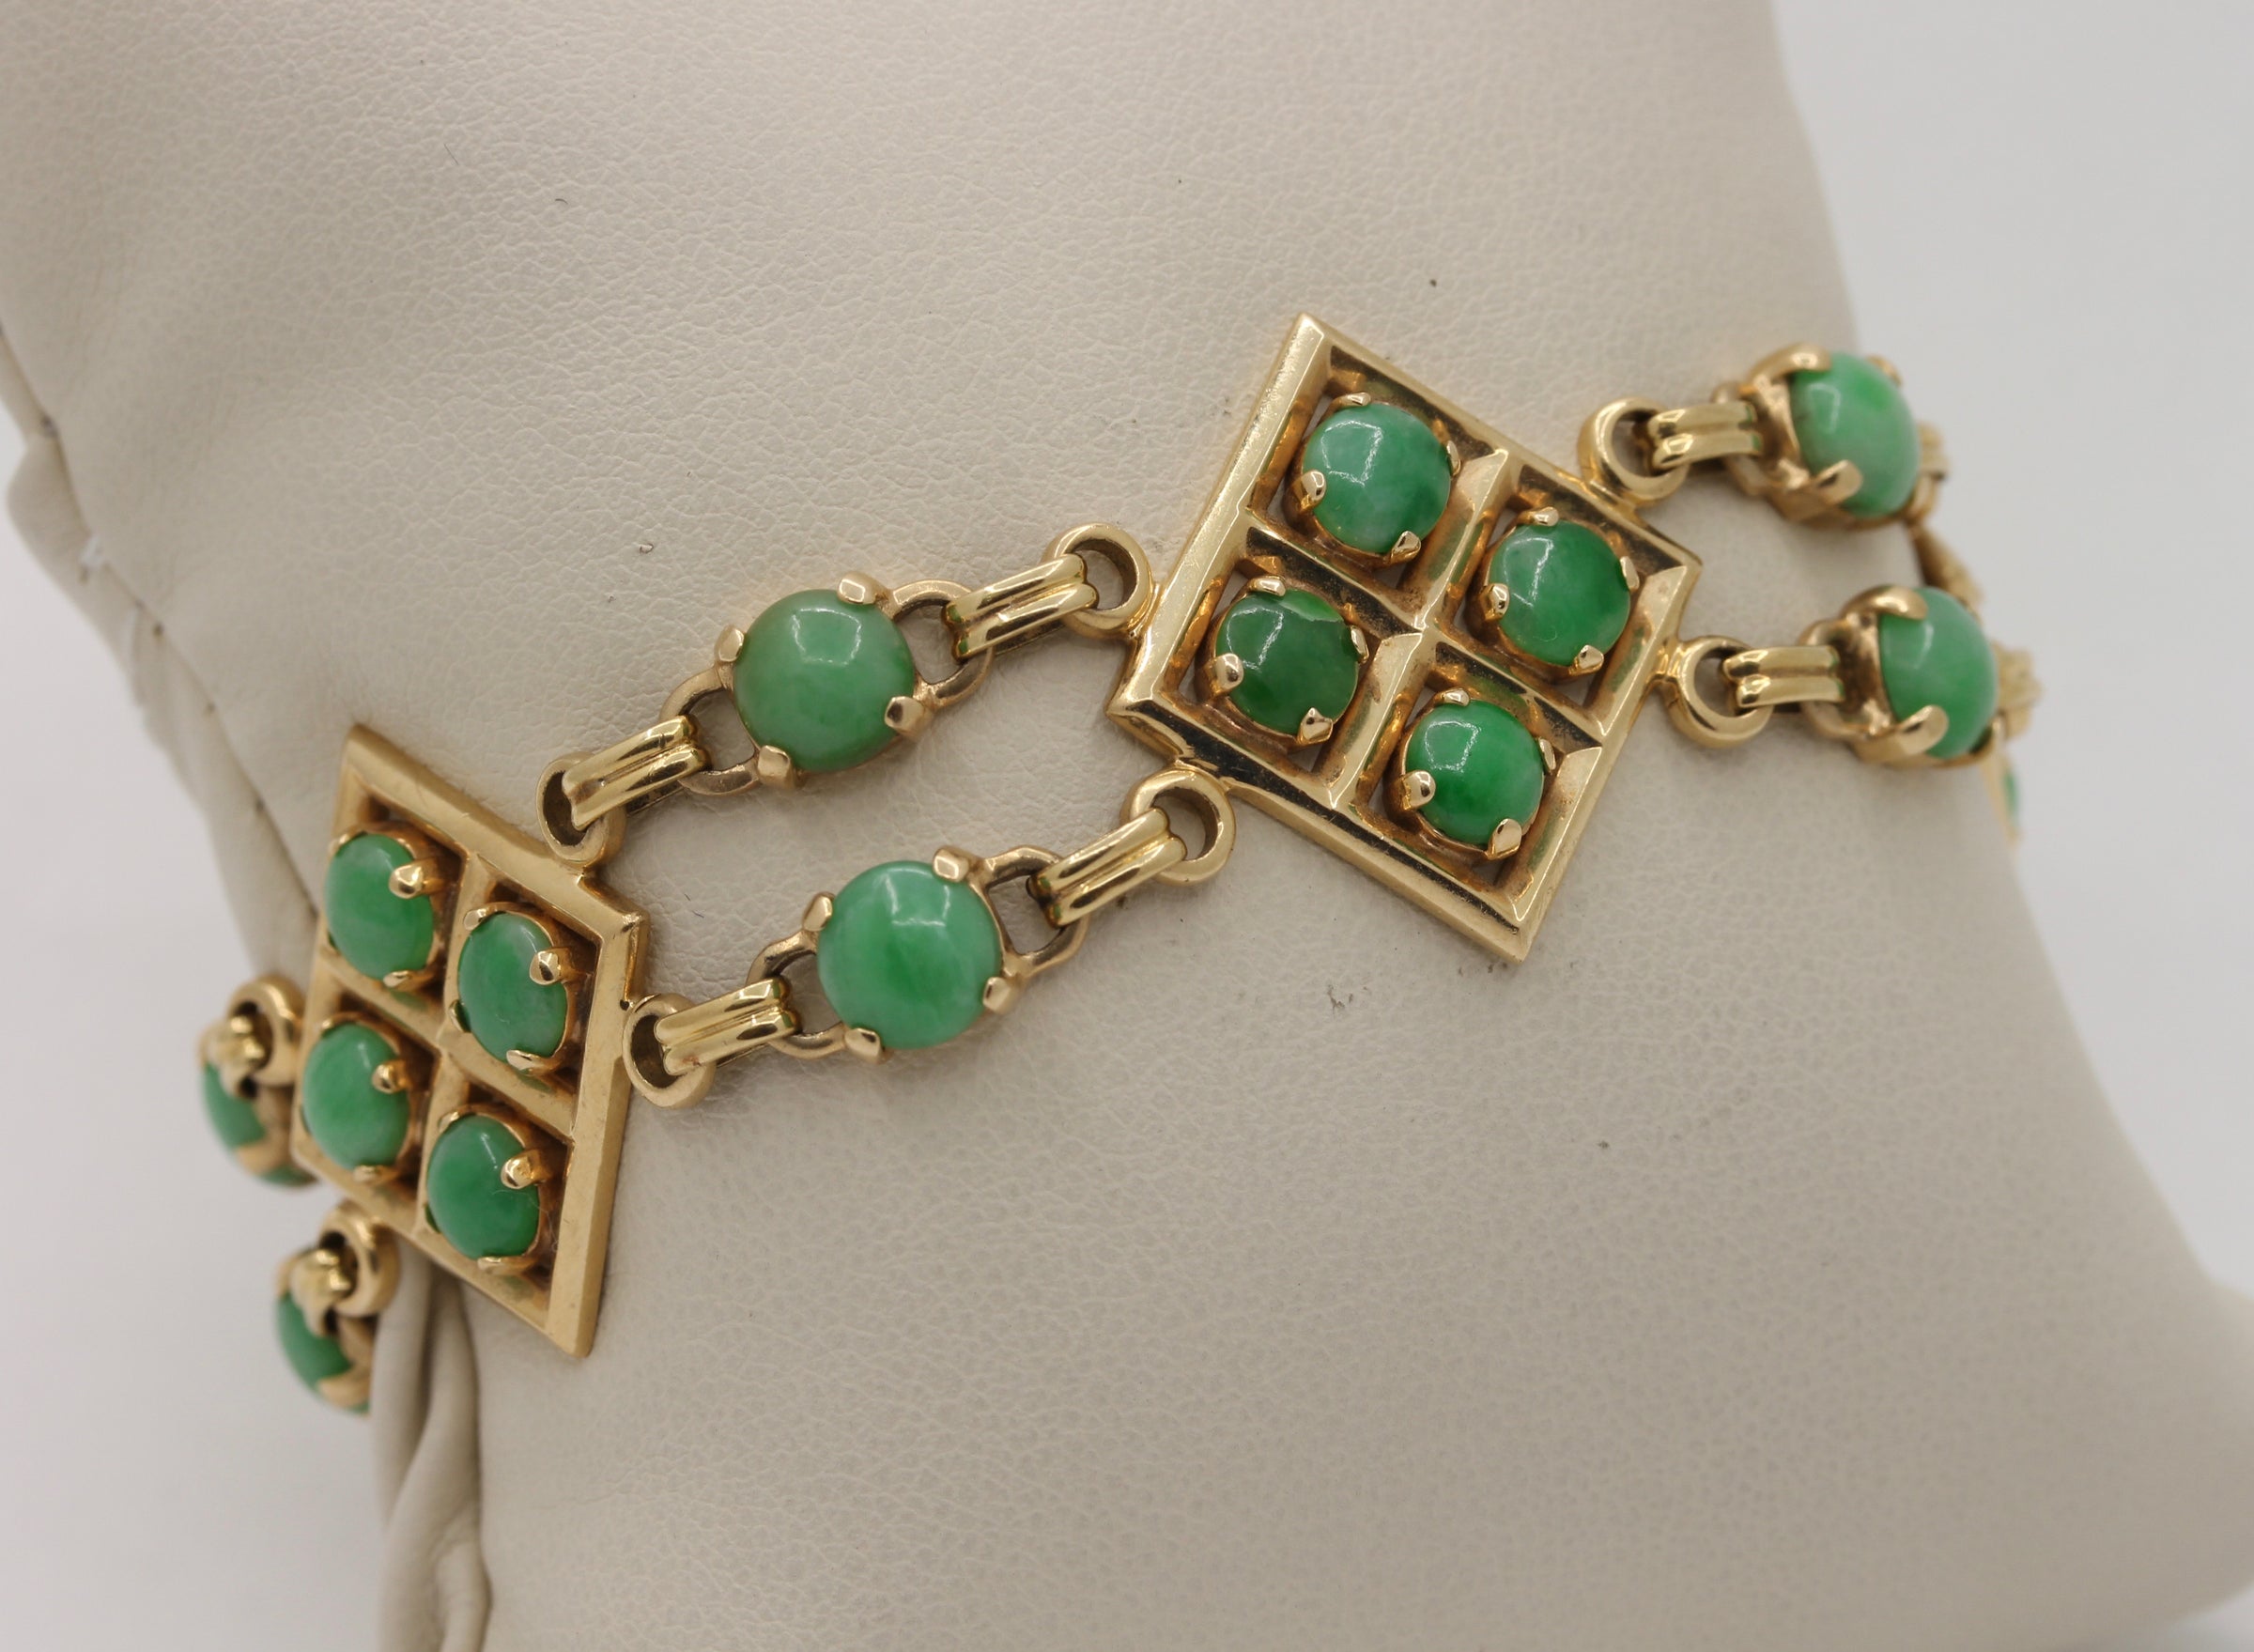 Best Vintage Gold Bracelet with Jade Jewelry Gift